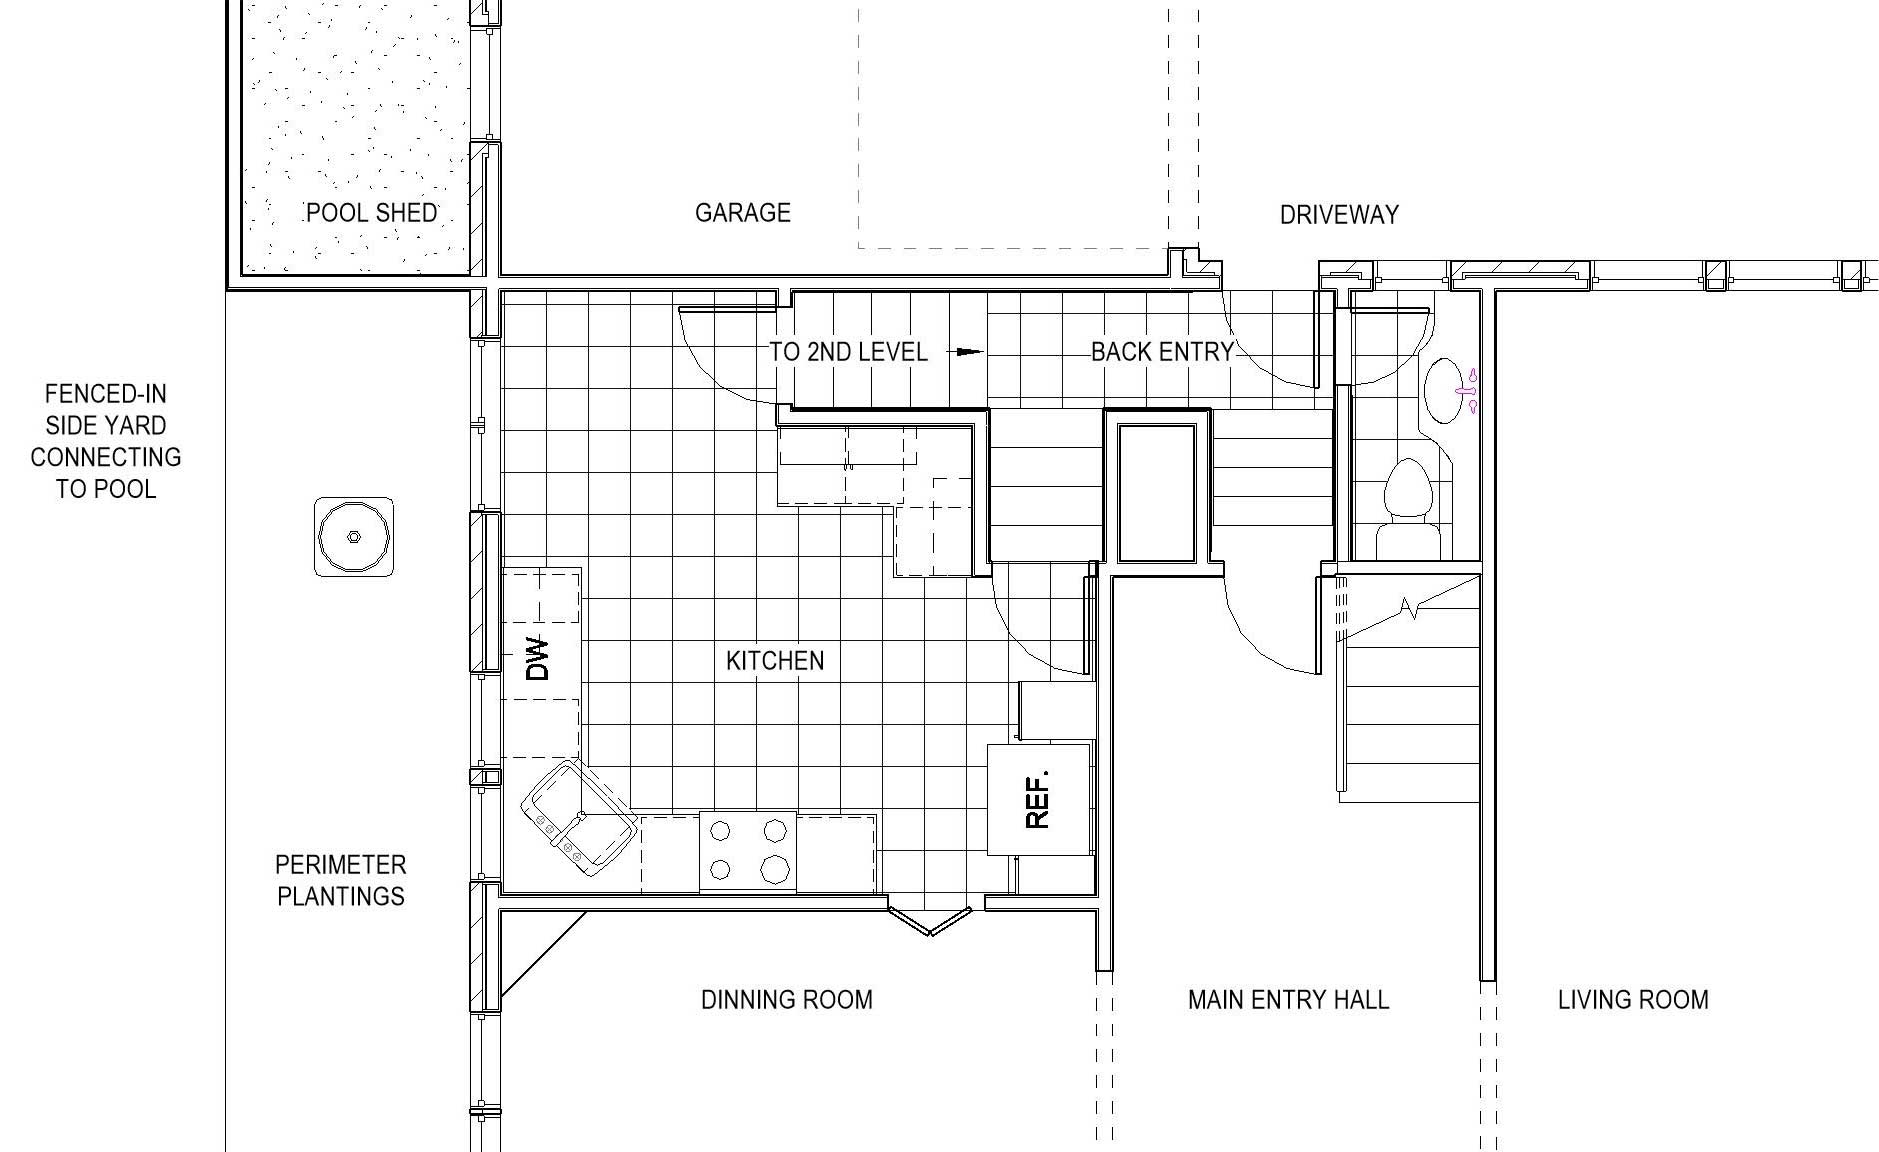 before floor plan of Des Moines tudor house with no access from back entry kitchen area to backyard pool